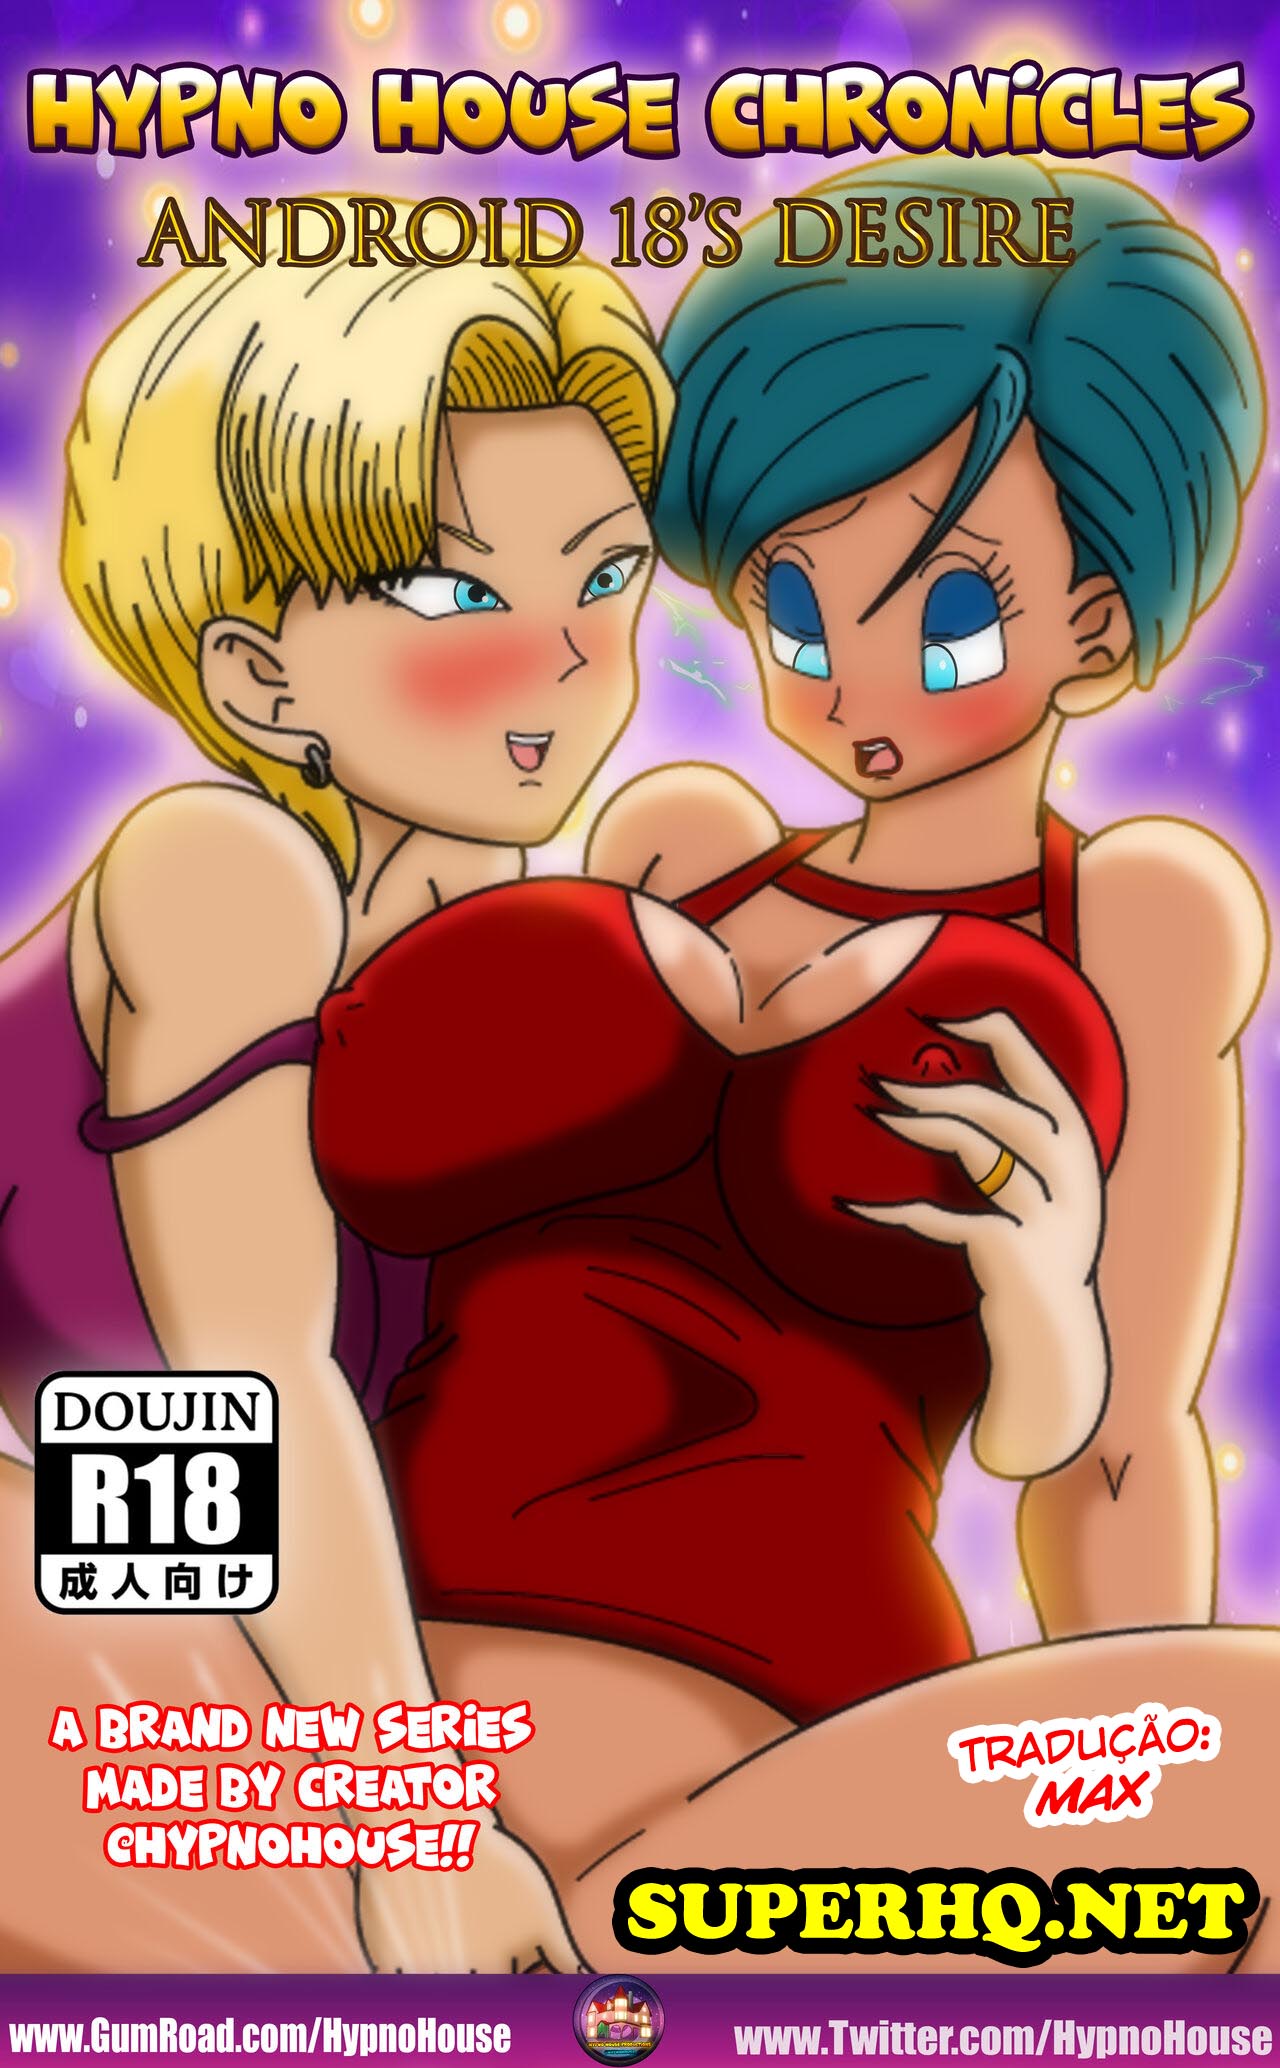 Hypno House Chronicles Android 18’s Desire - 2